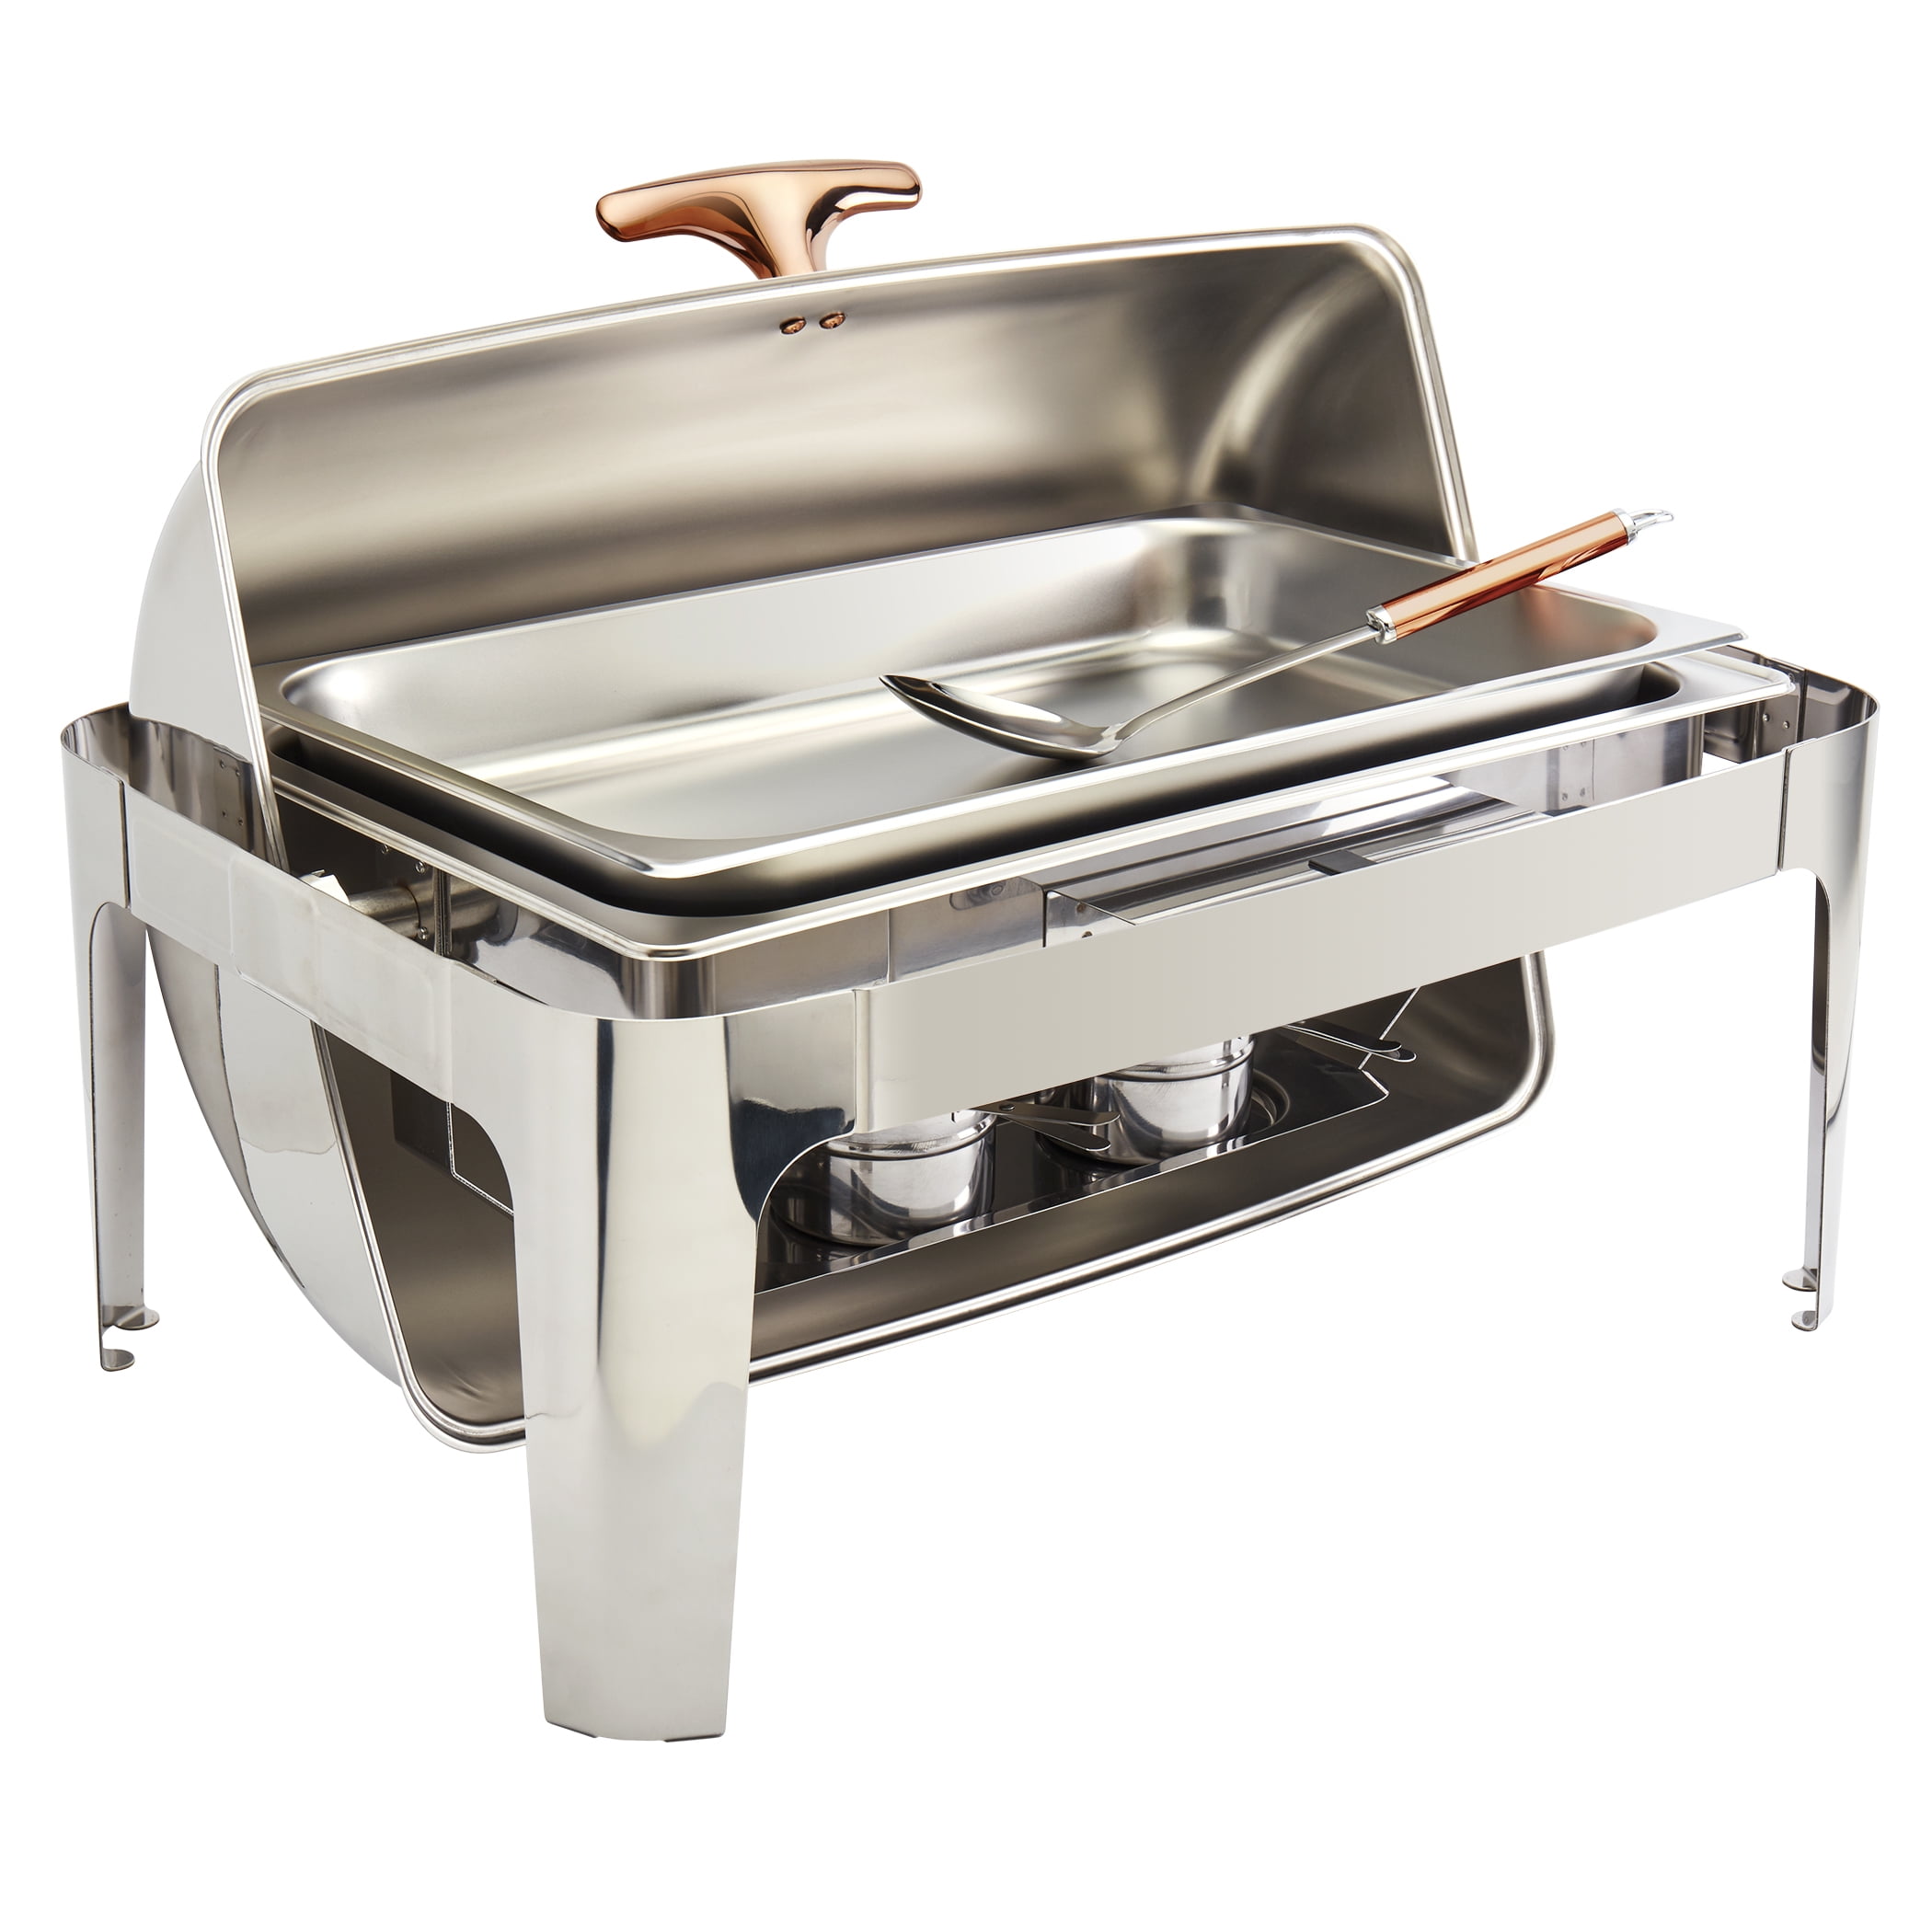 NEW Stainless Steel Double Soup Station Roll Top Chafing Dish Food Warmer Server 